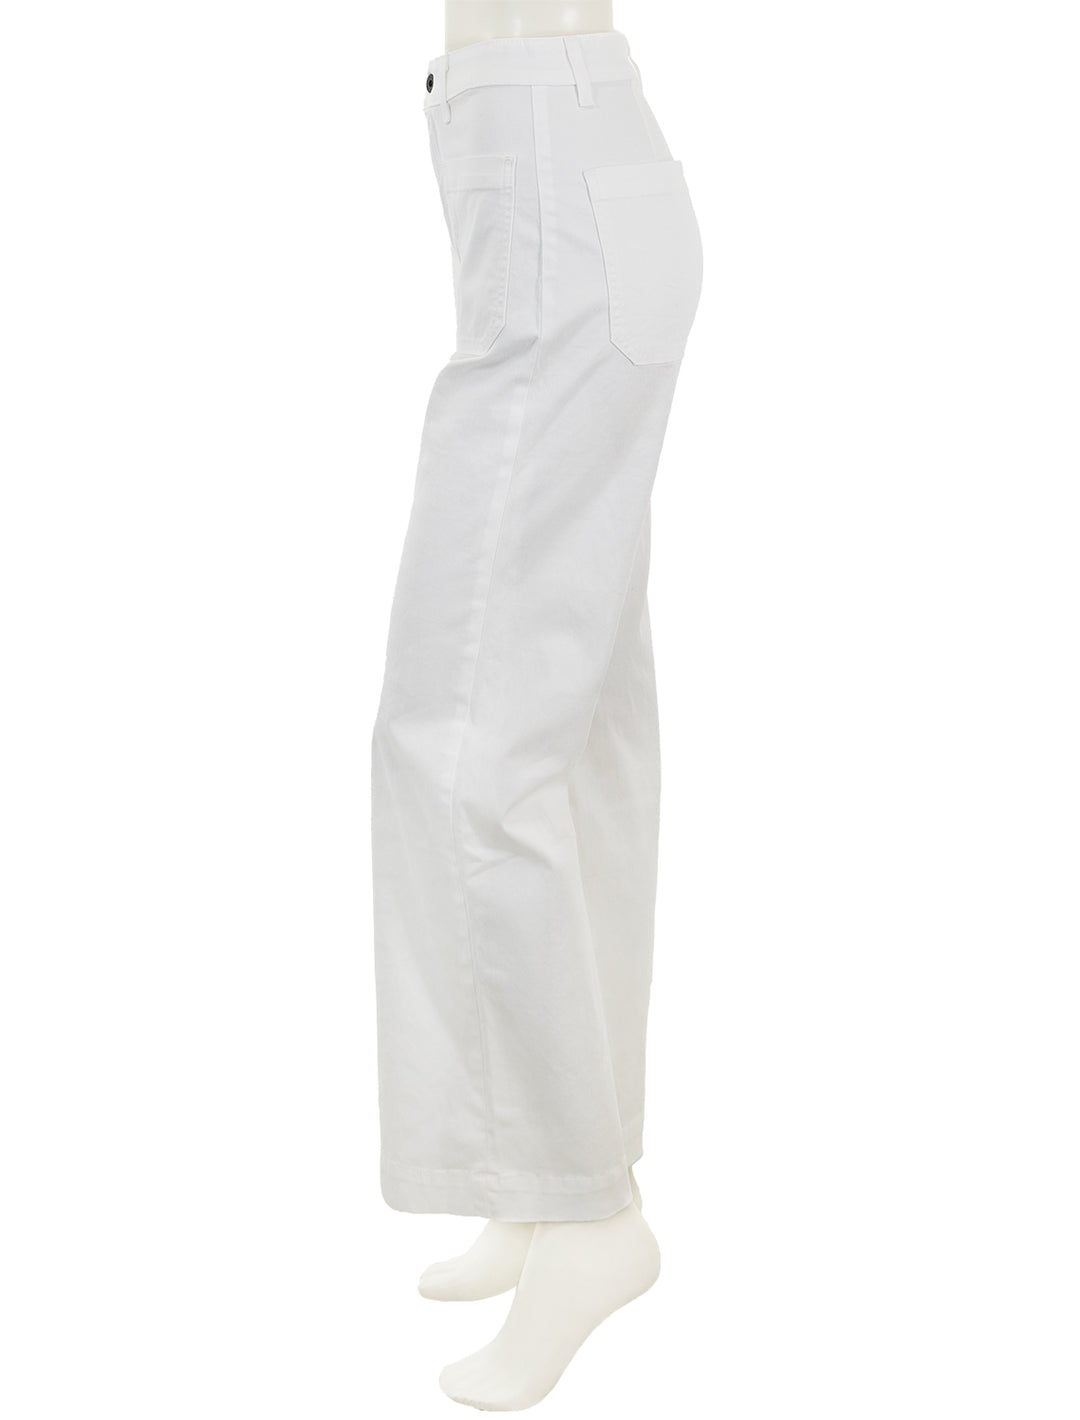 Side view of ASKK NY's Sailor Twill Pant in Ivory.